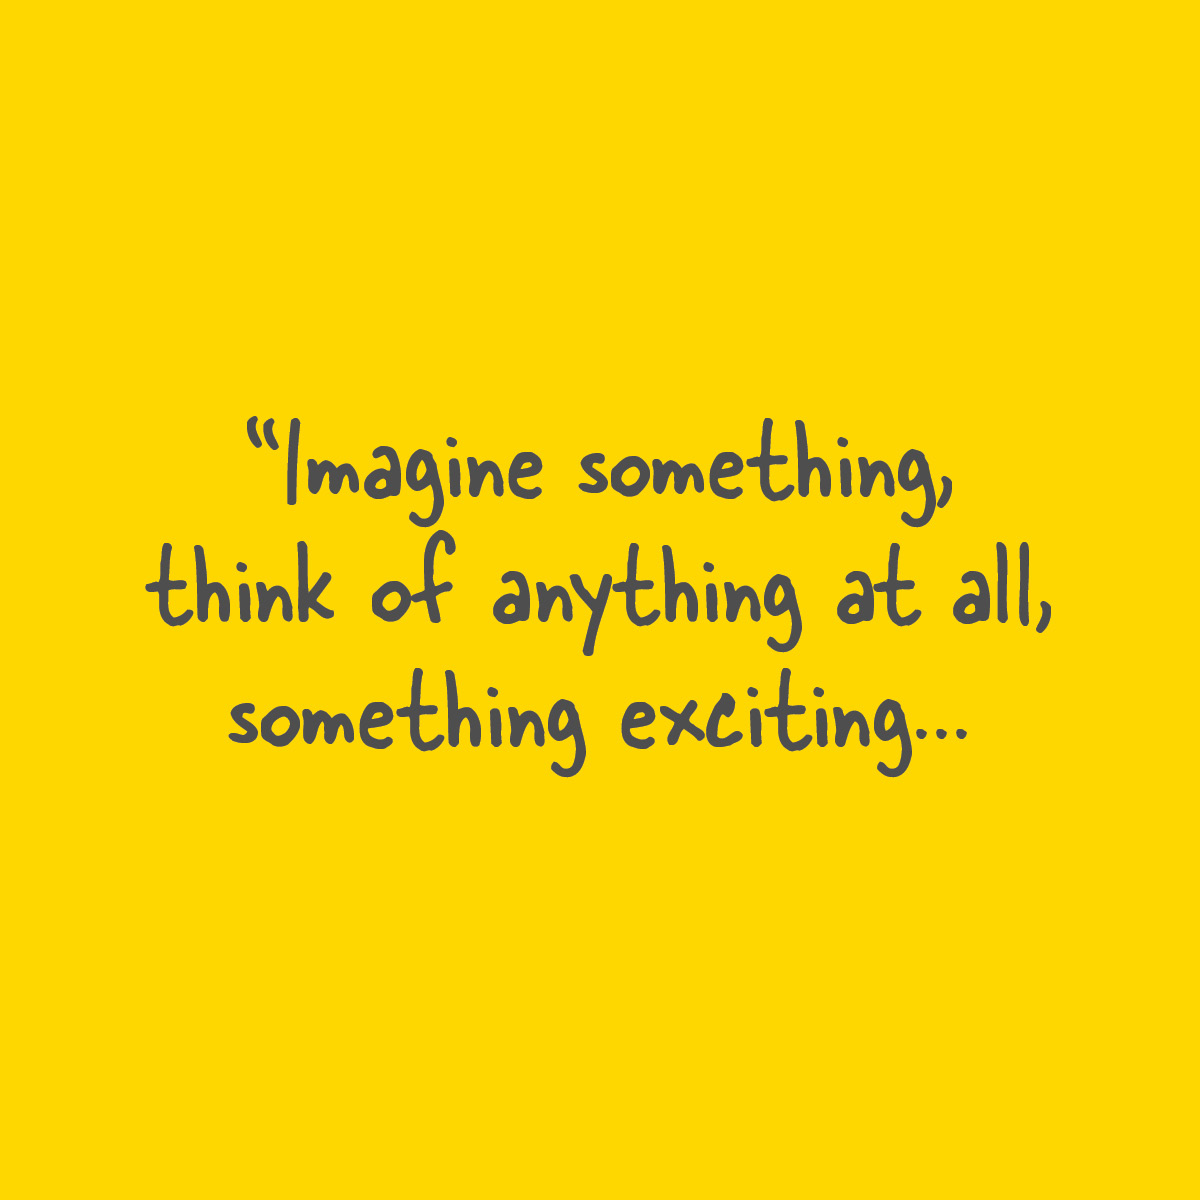 Imagine something, think of anything at all, something exciting...